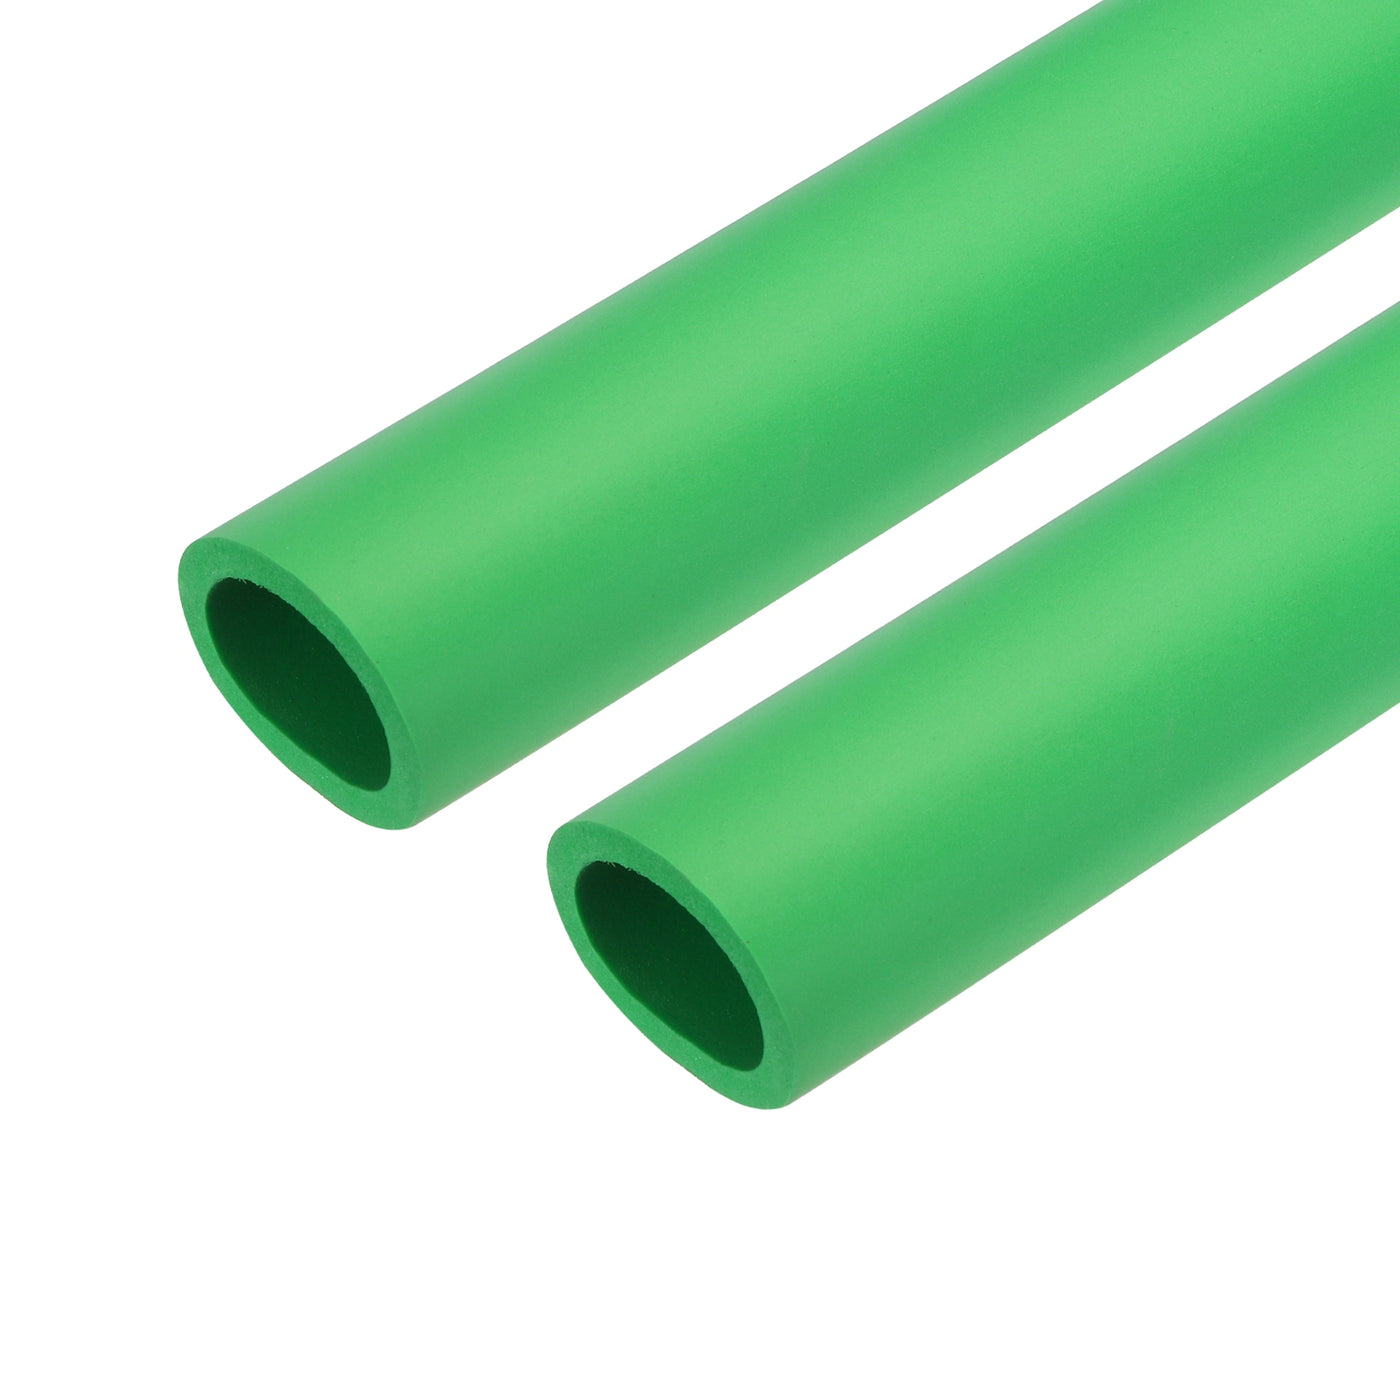 uxcell Uxcell 2pcs 3.3ft Pipe Insulation Tube 1 1/4 Inch(32mm) ID 44mm OD Foam Tubing for Handle Grip Support, Green